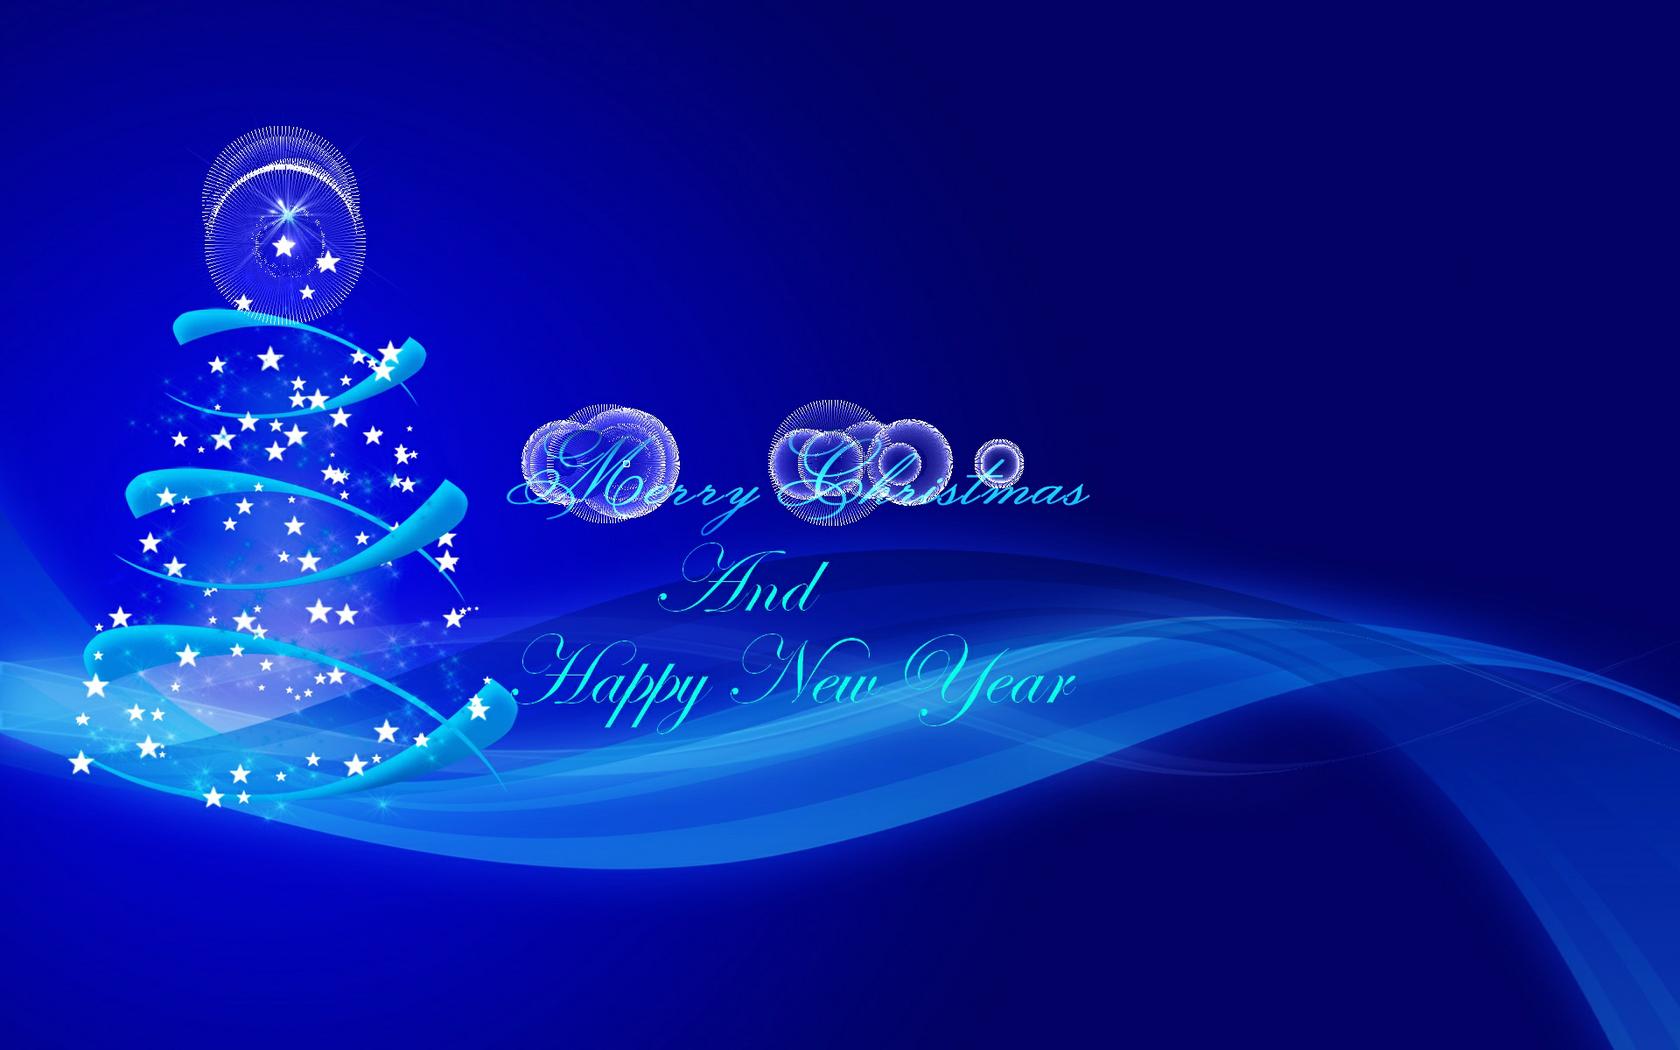 blue-bakcground-happy-new-year-merry-christmas-wallpapers